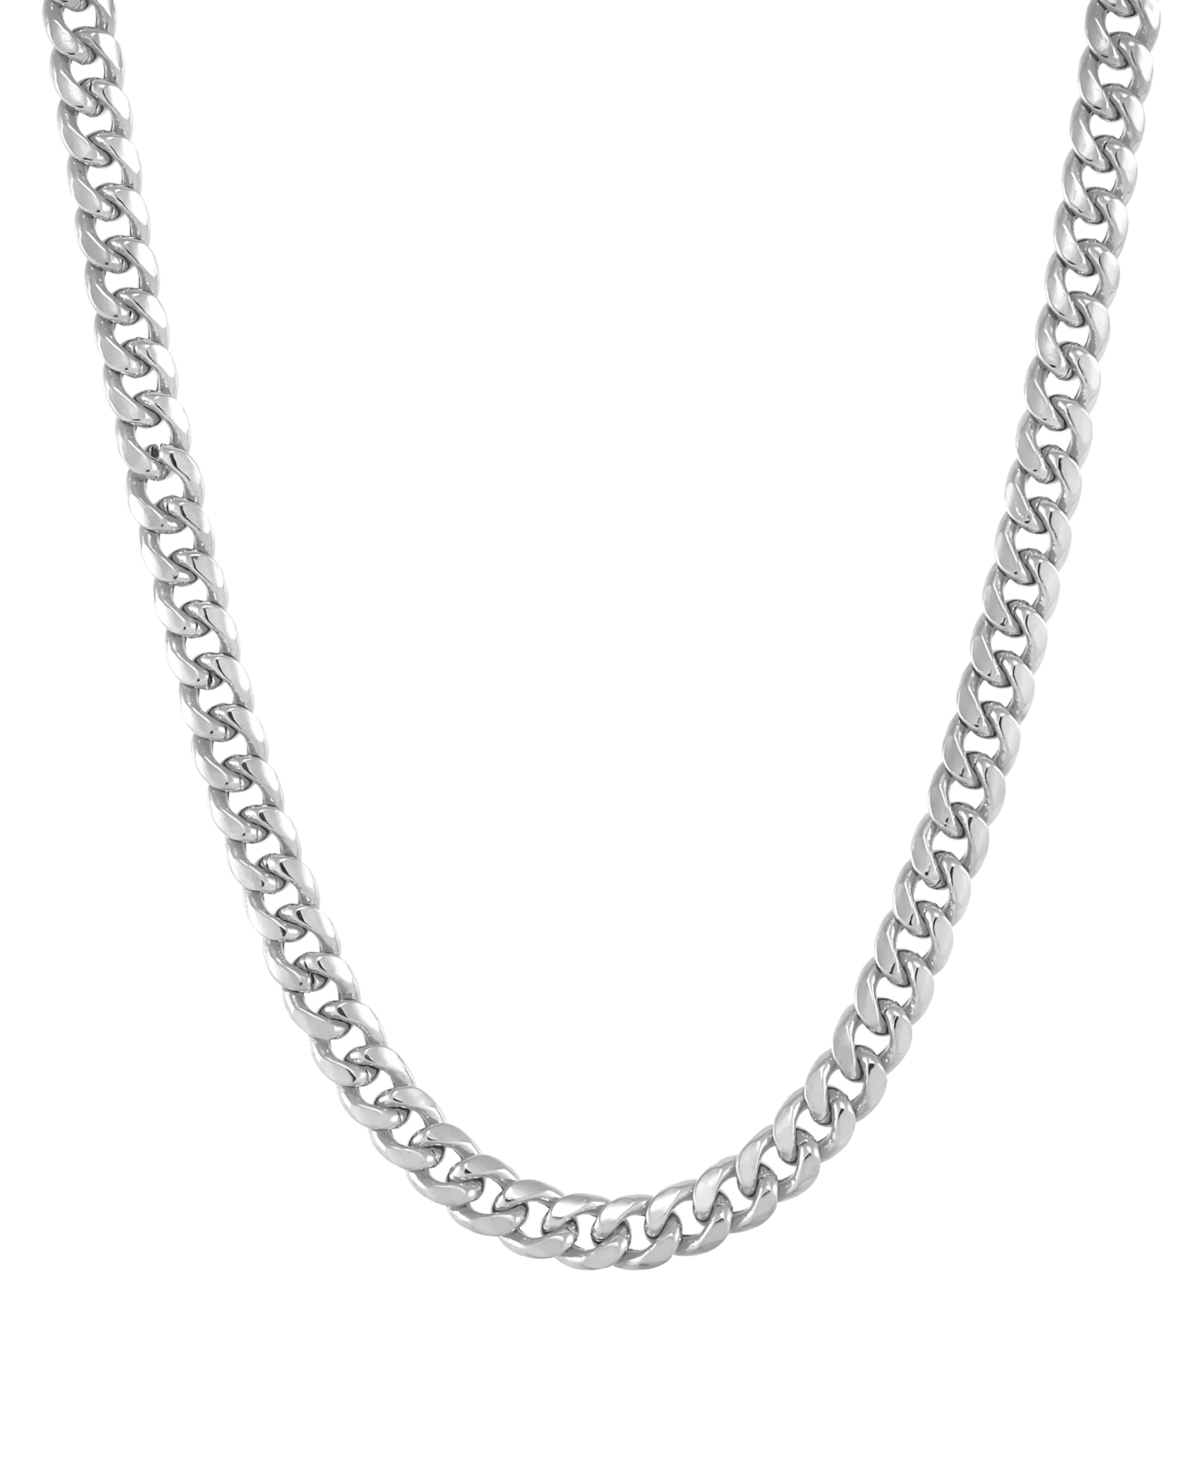 Italian Gold Miami Cuban Link 22" Chain Necklace in 10k White Gold